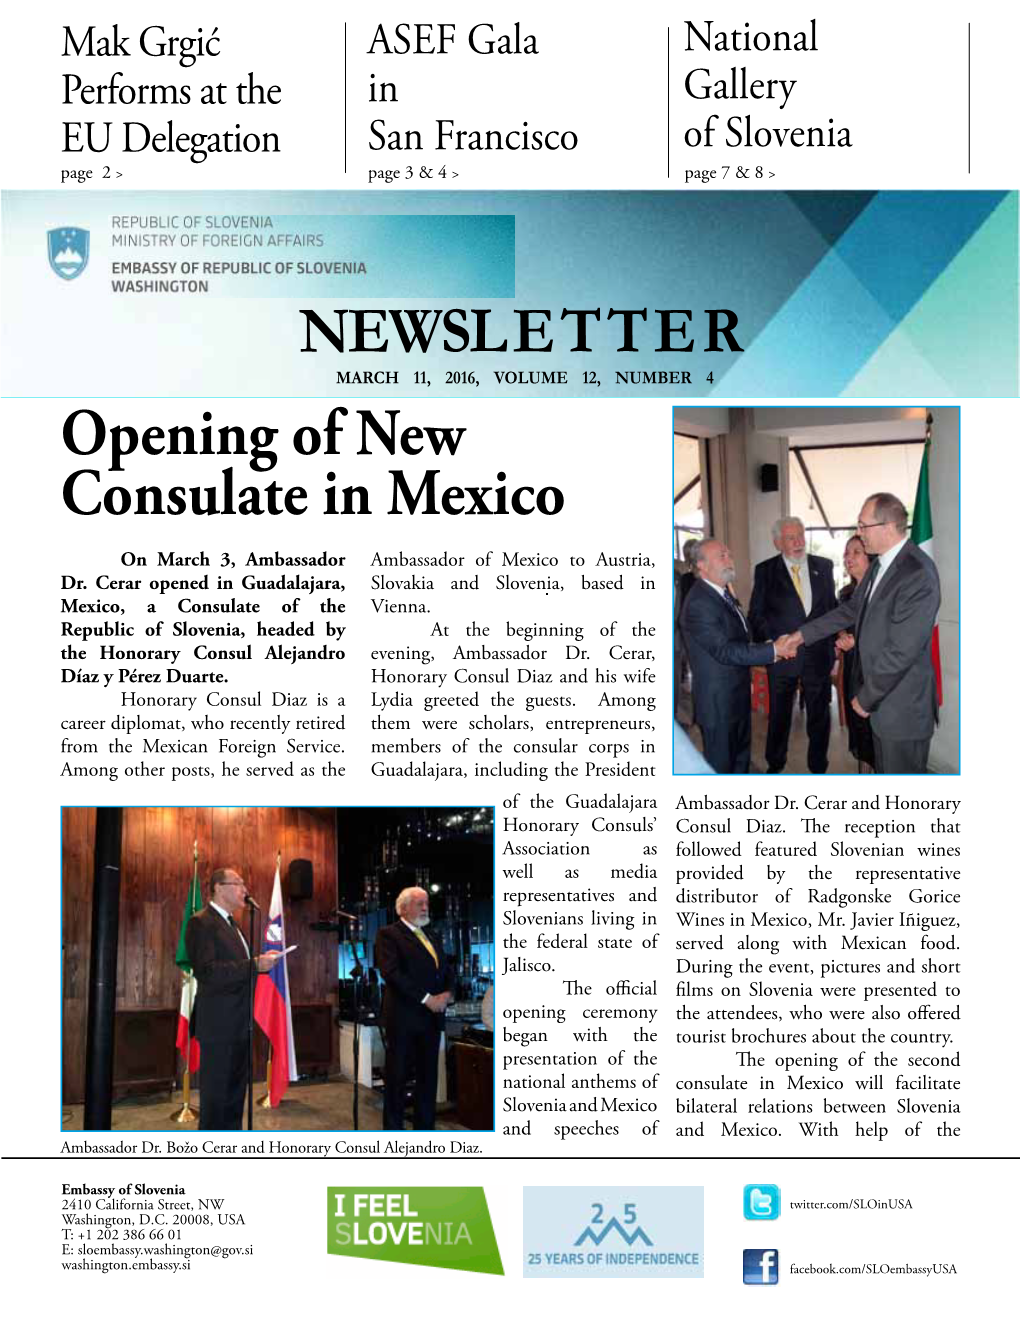 NEWSLETTER Opening of New Consulate in Mexico